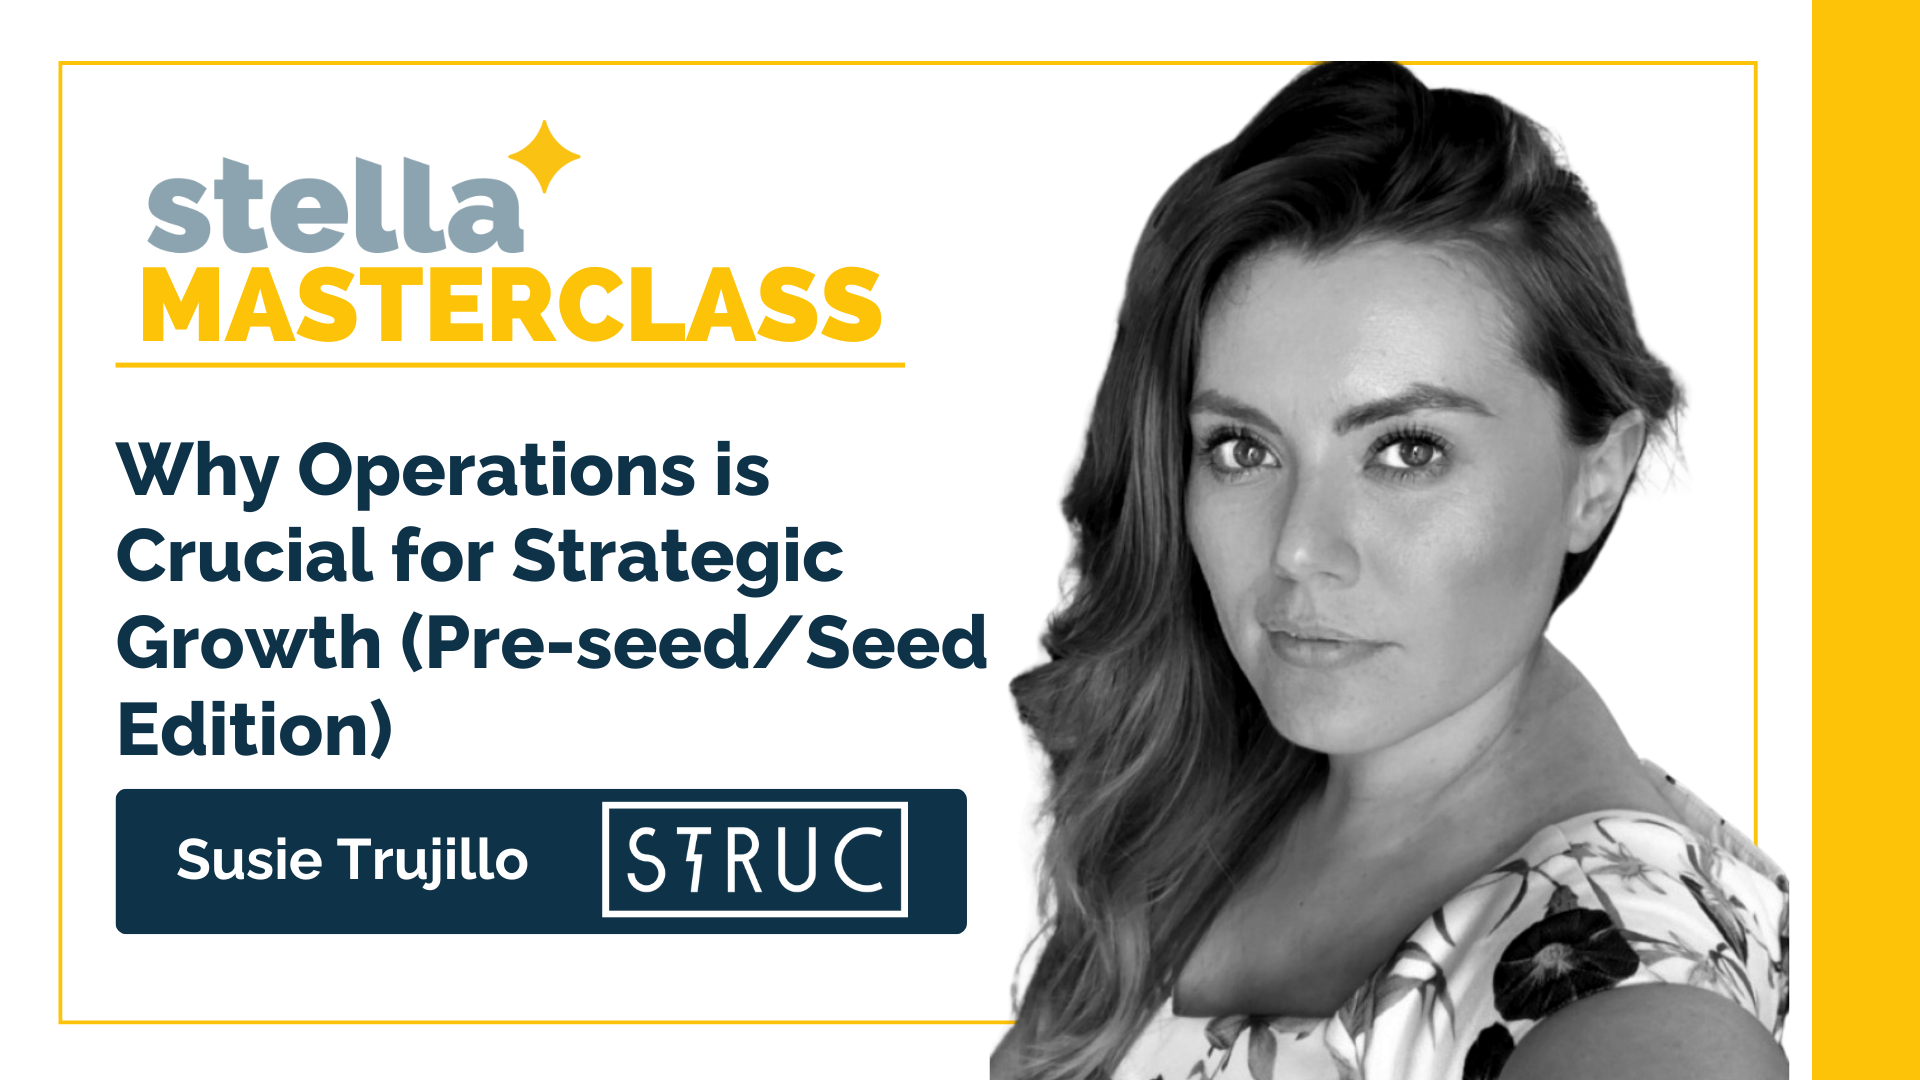 STRUC Masterclass: Why Operations is Crucial for Strategic Growth (Pre-seed/Seed Edition)